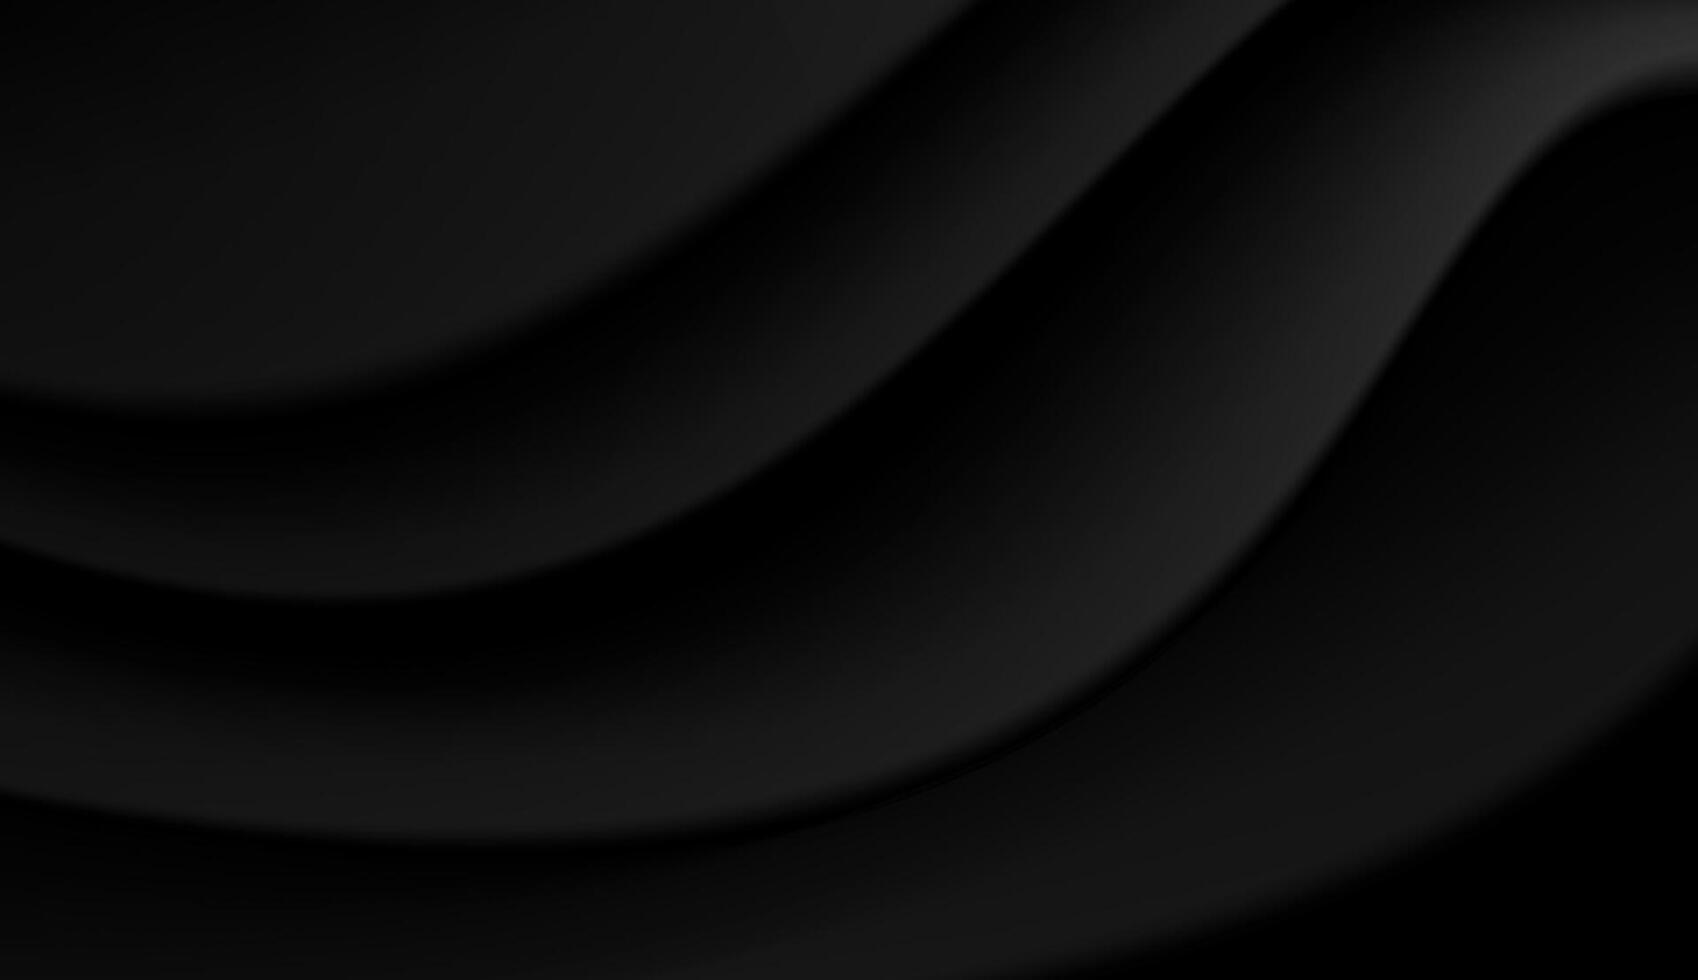 Black abstract background with flowing patterns, dark tones, vector illustration.